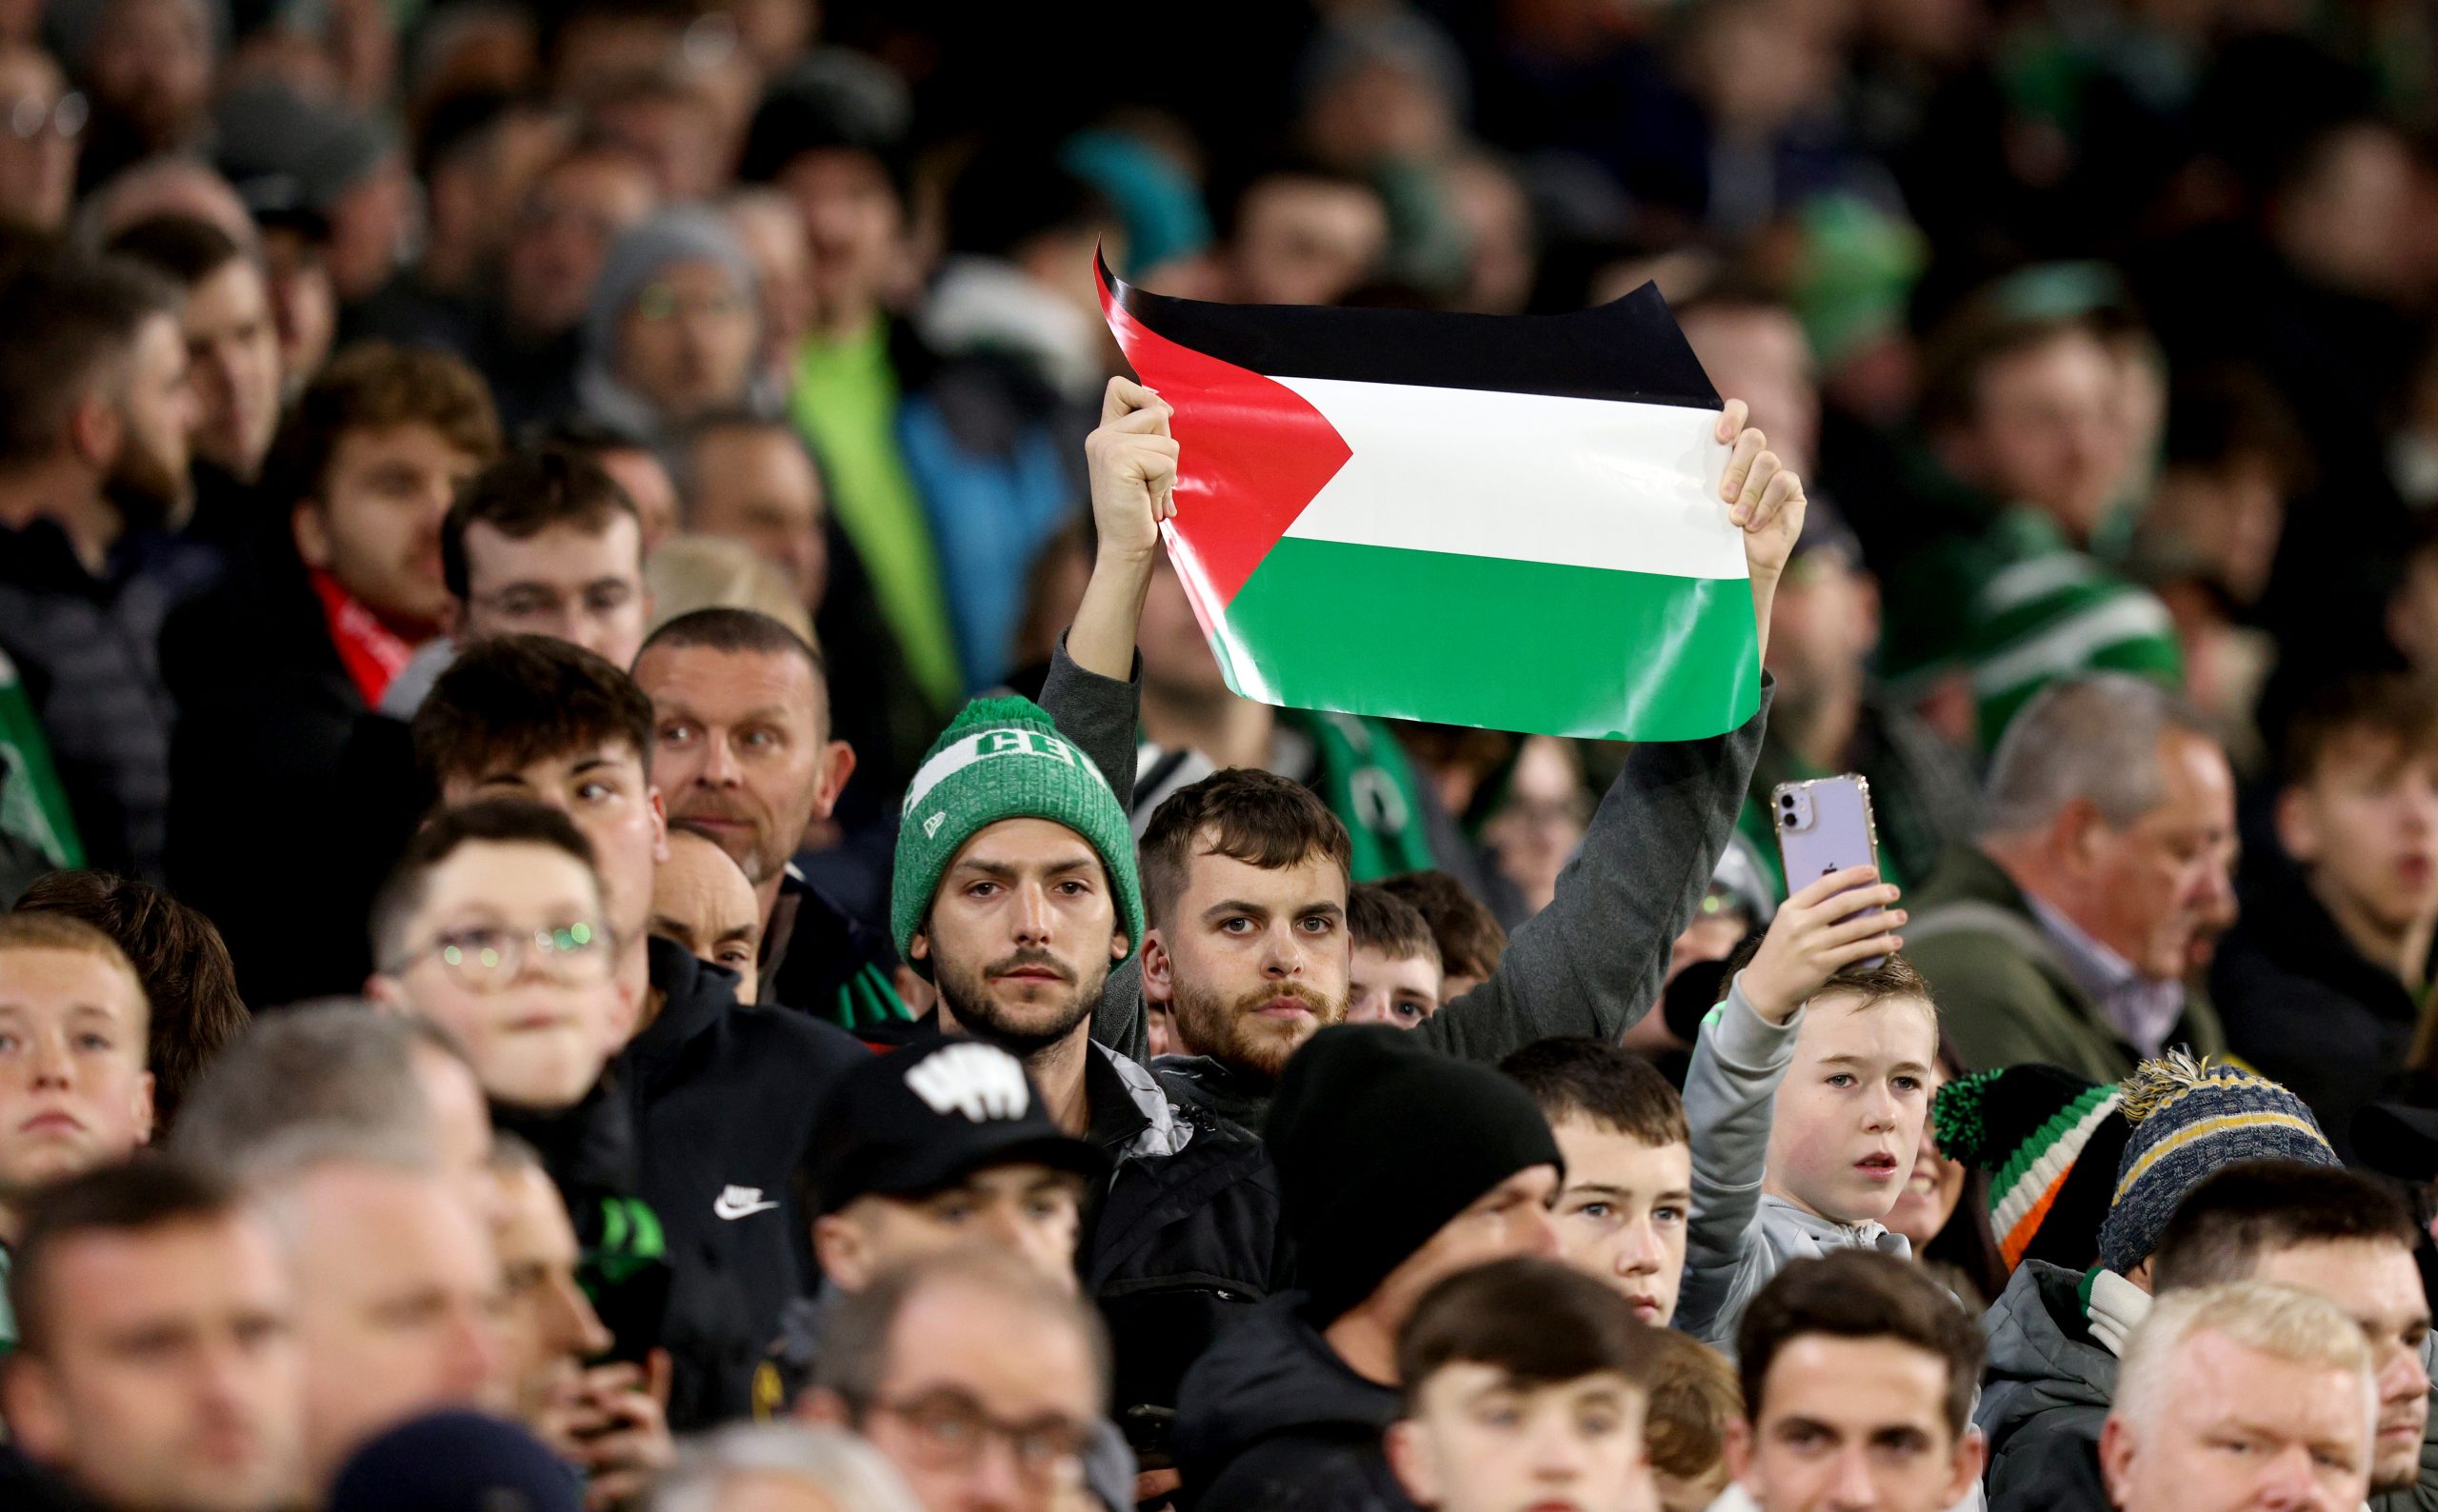 UEFA imposes $30,000 fine on Celtic FC for Palestinian flag shown by fans